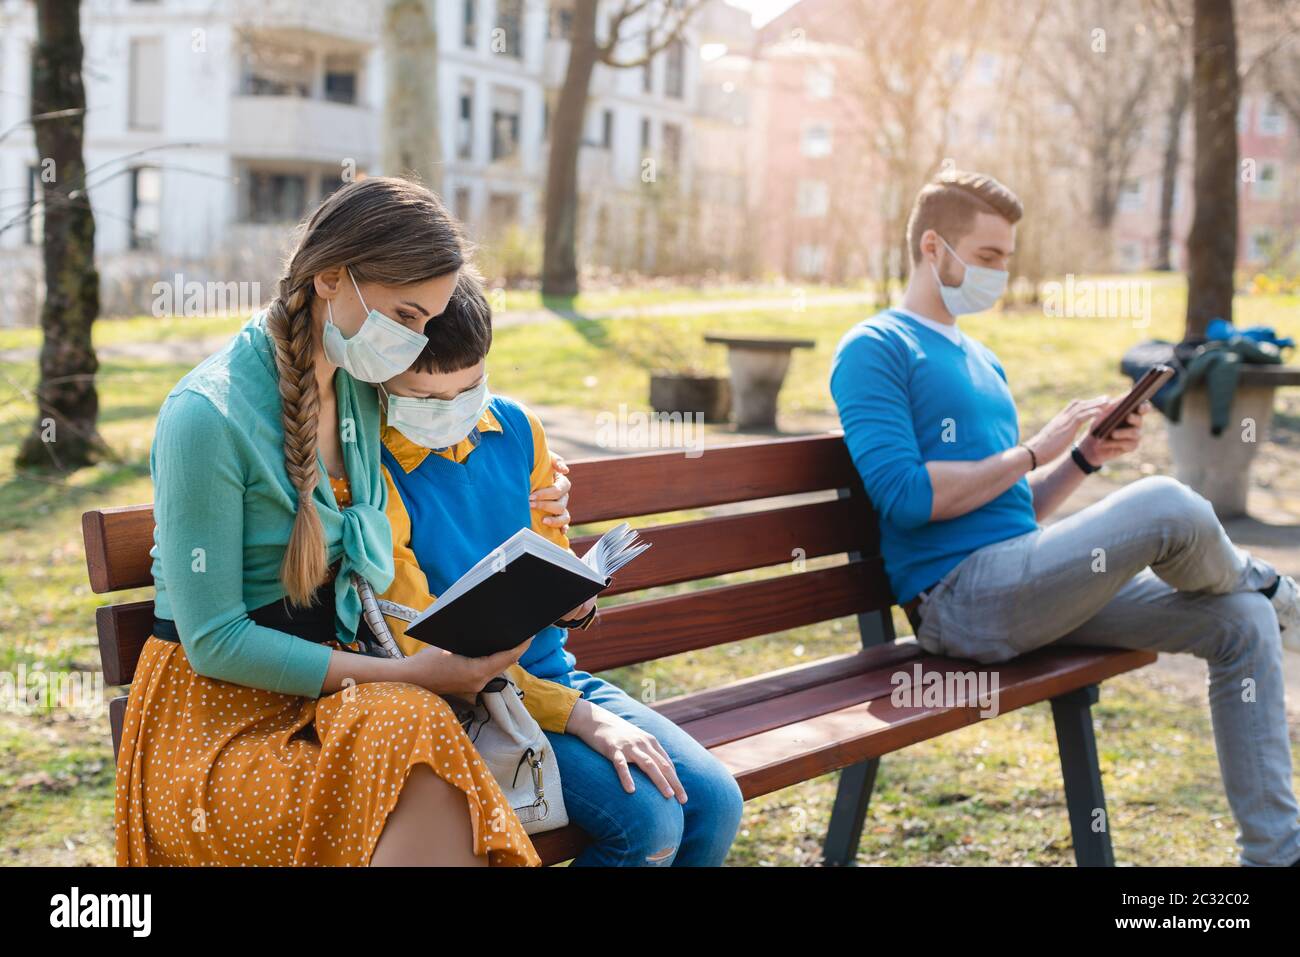 People sitting on park bench in the sun practicing social distancing in corona crisis wearing masks Stock Photo